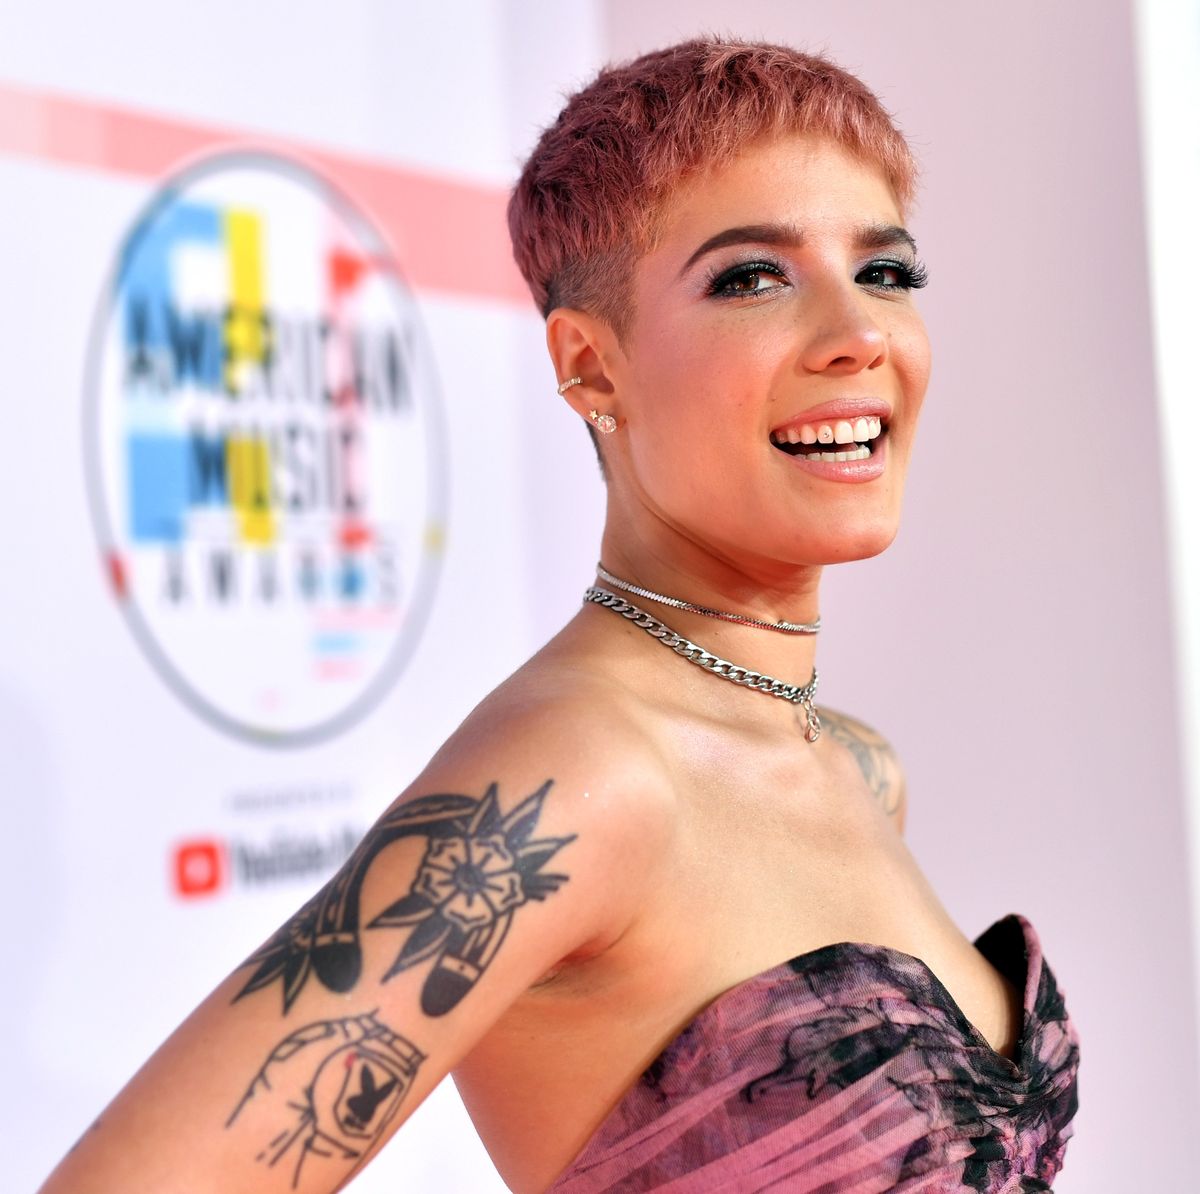 Halsey's Tattoos - Photos and Meaning of Halsey's Tattoos